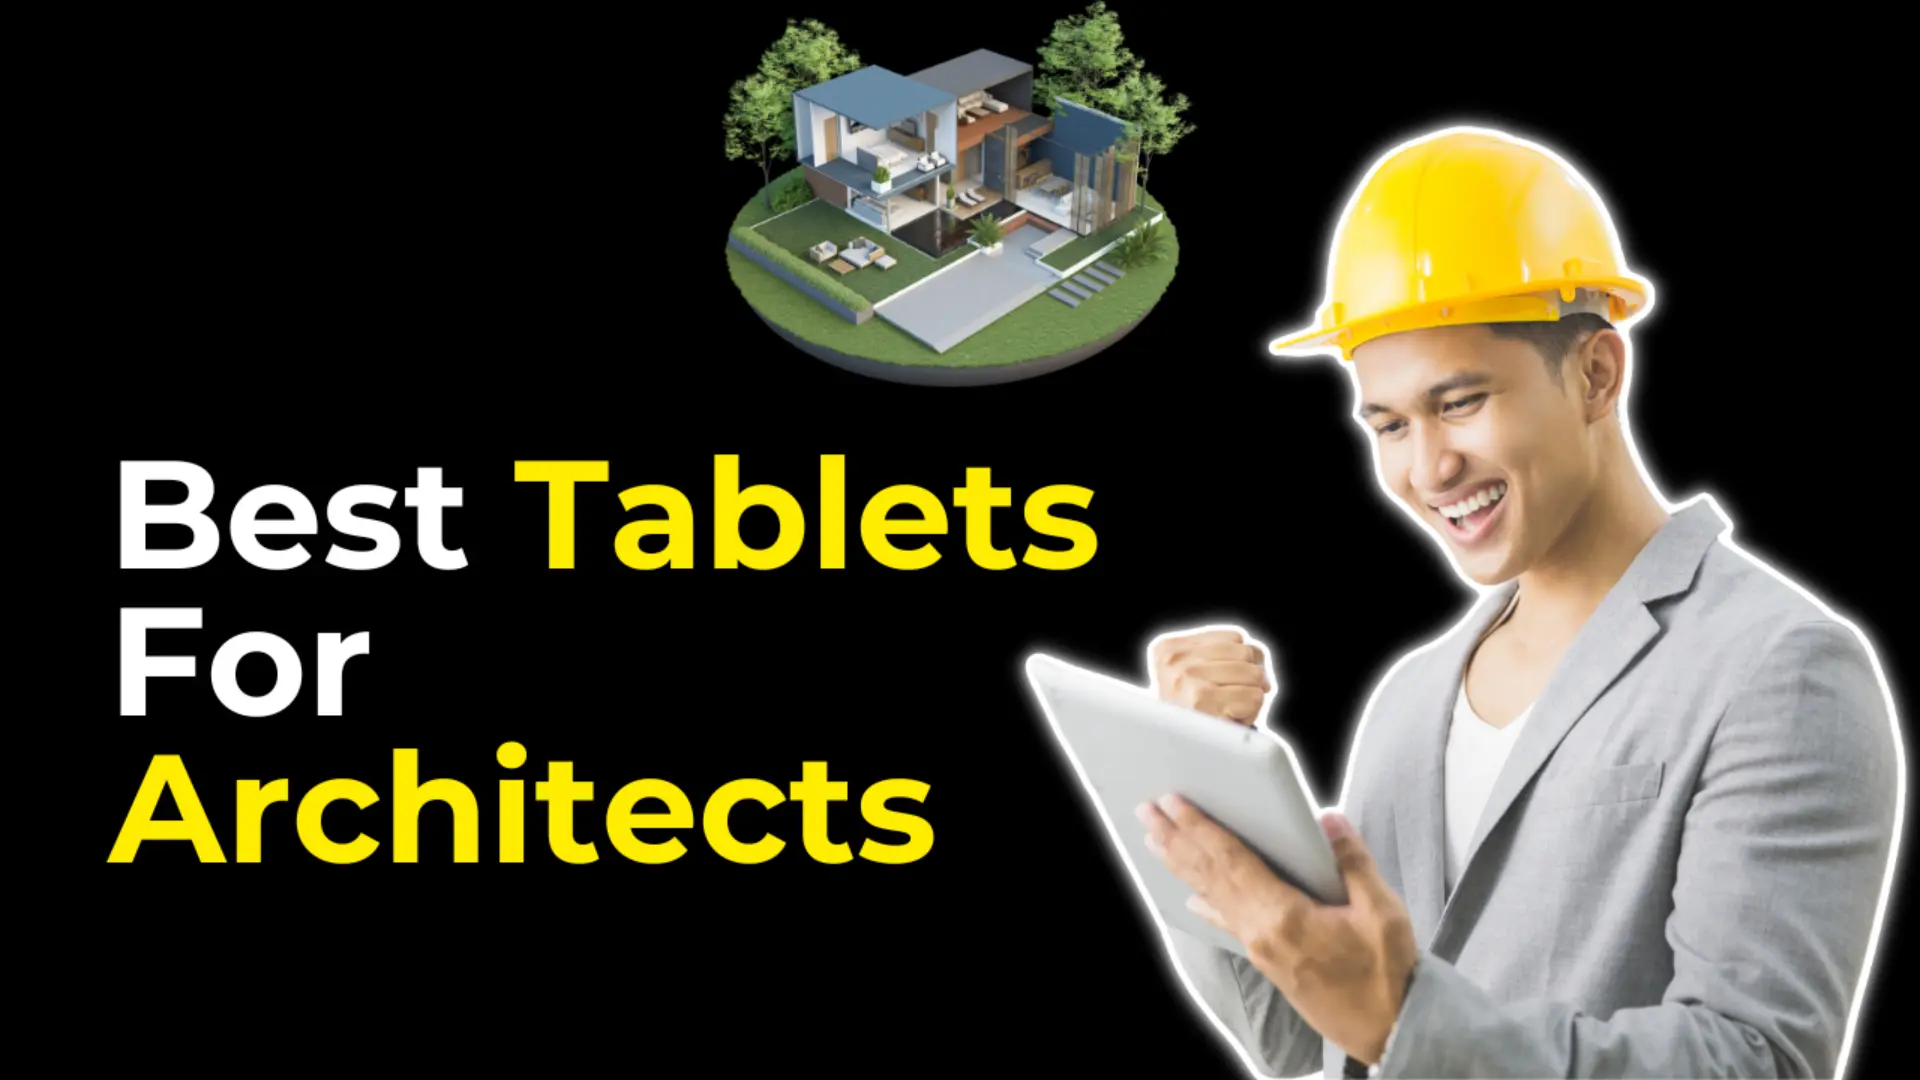 Best Tablets For Architects